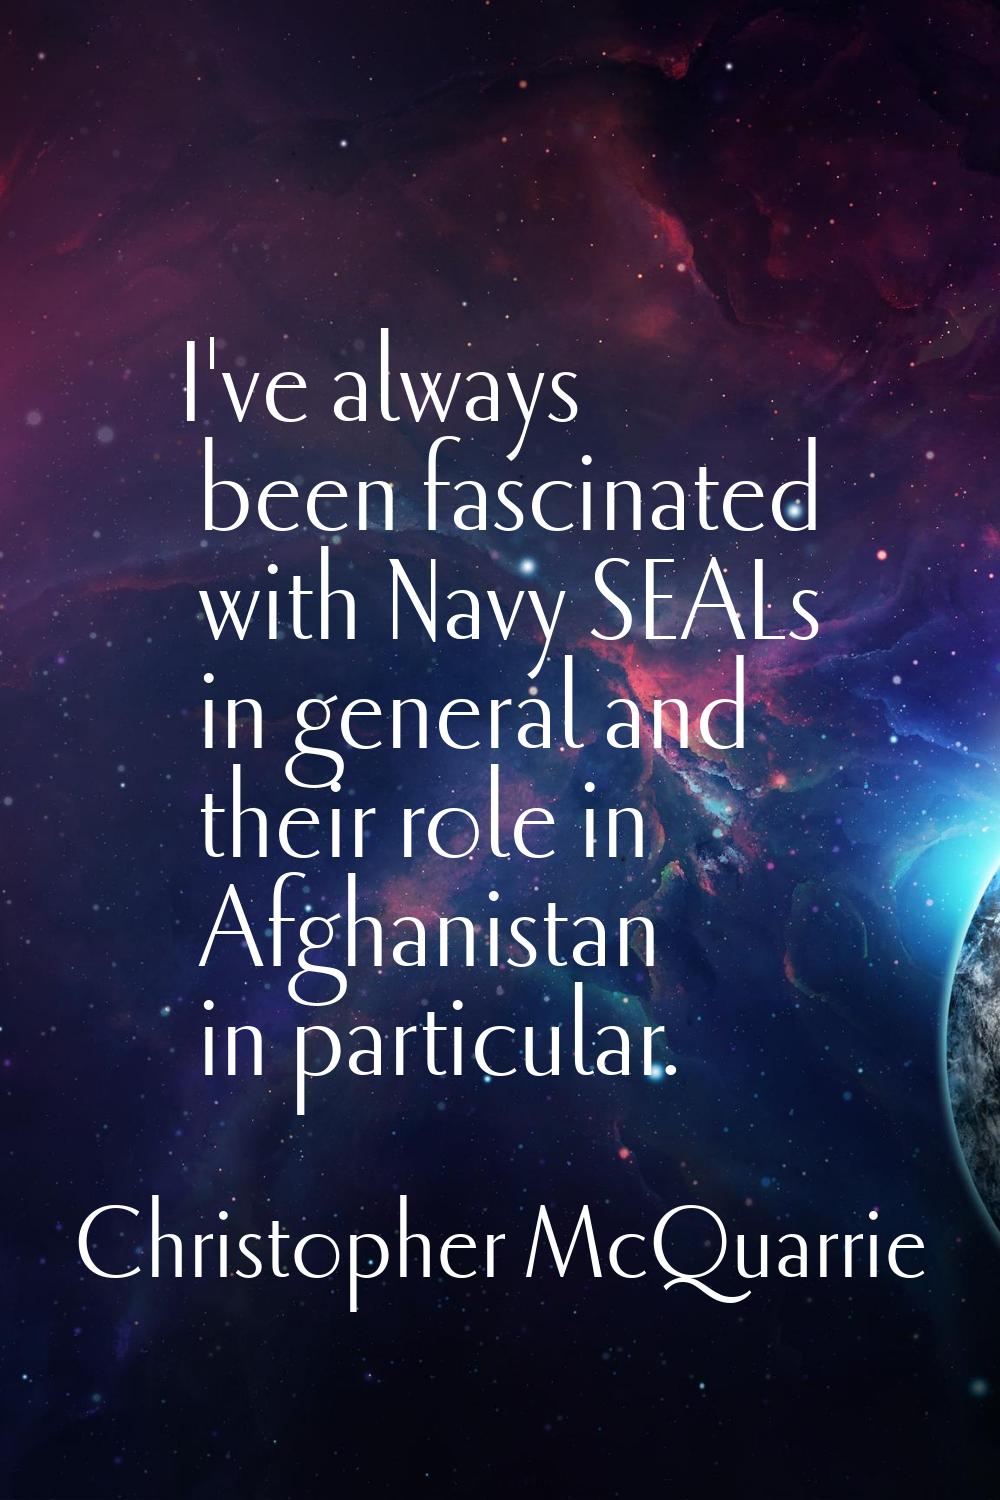 I've always been fascinated with Navy SEALs in general and their role in Afghanistan in particular.